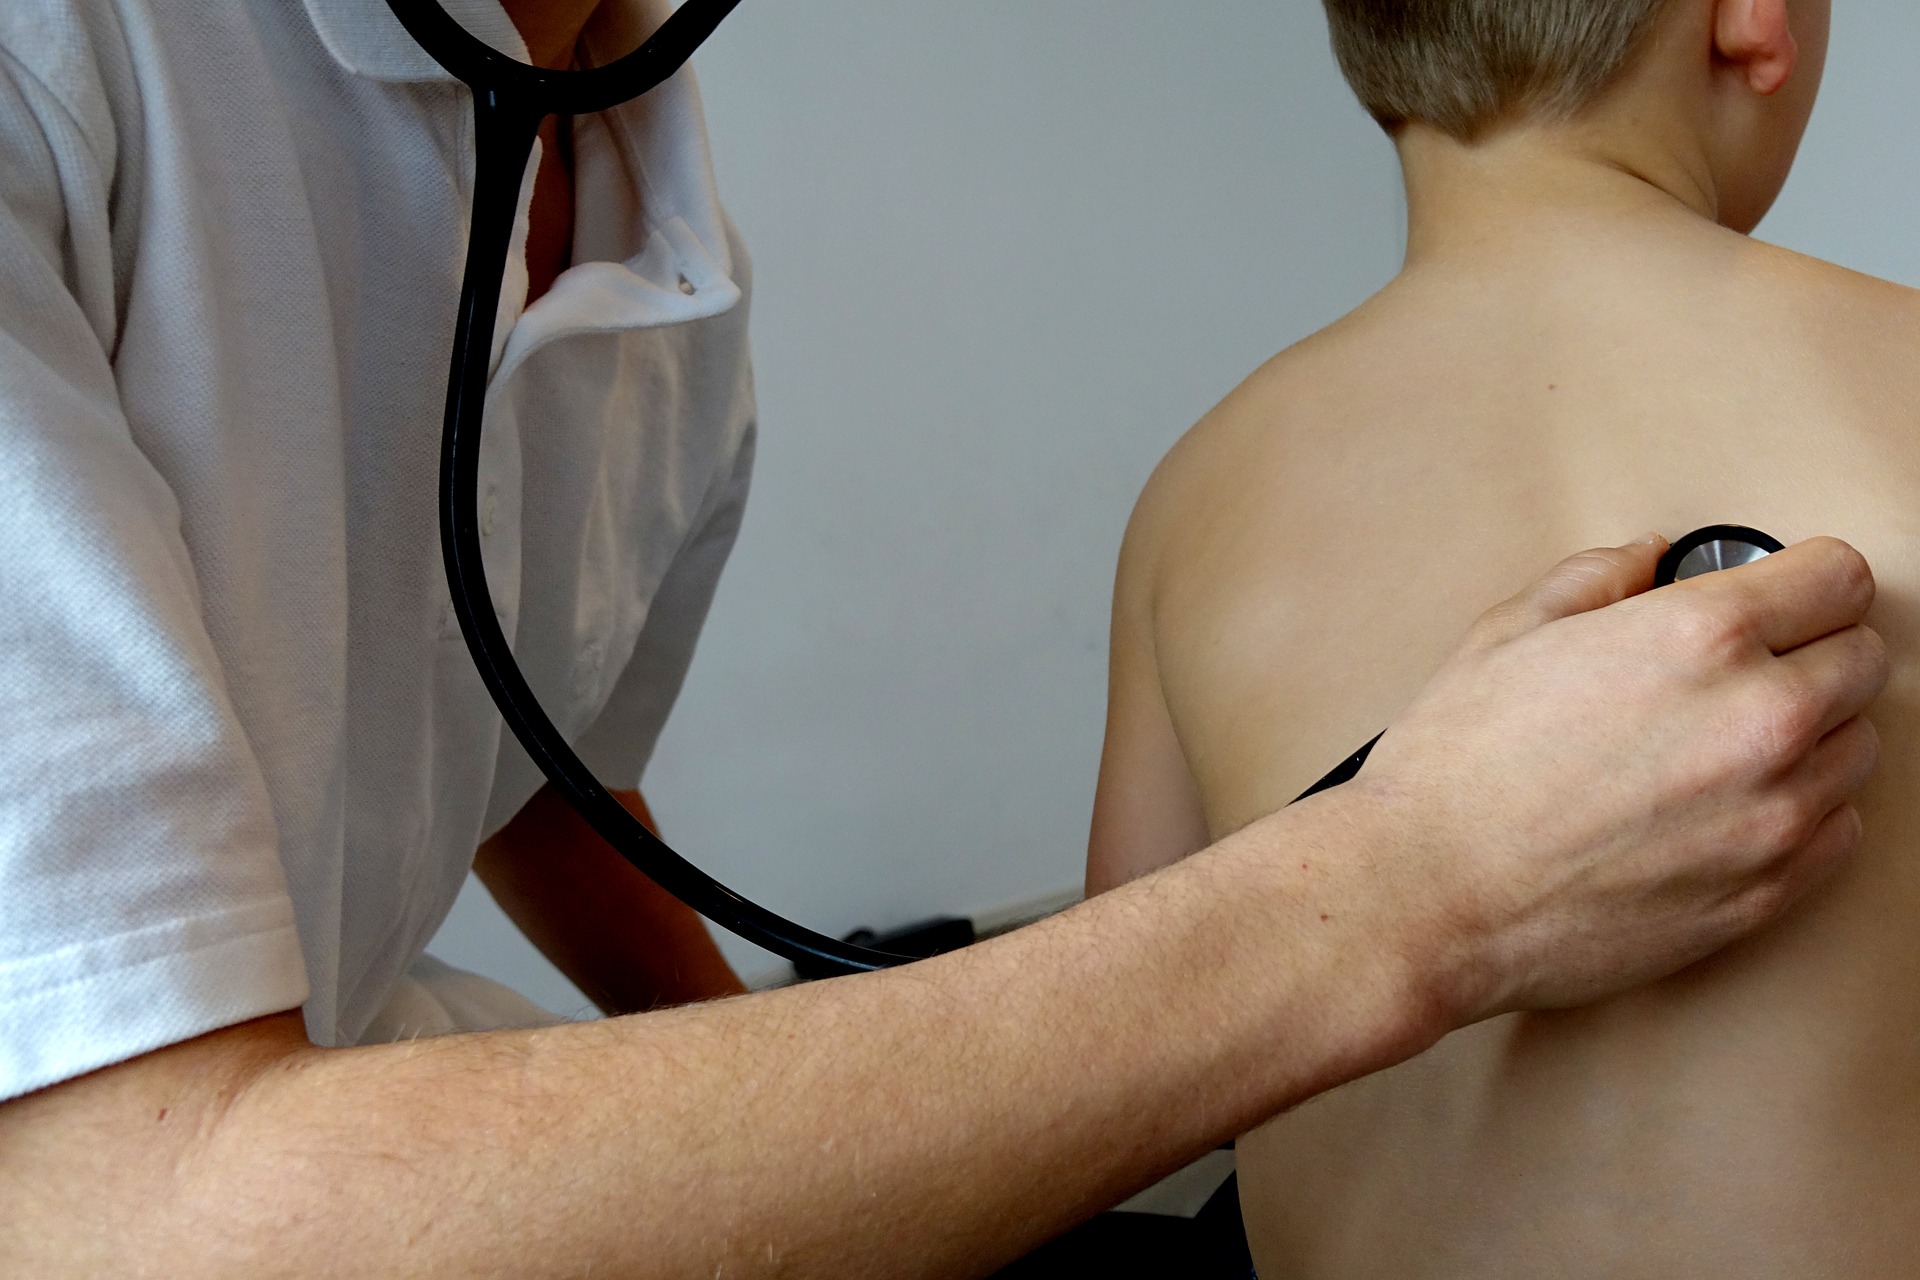 Child being checked by a doctor using a stethoscope. Image courtesy of Semevent via Pixabay